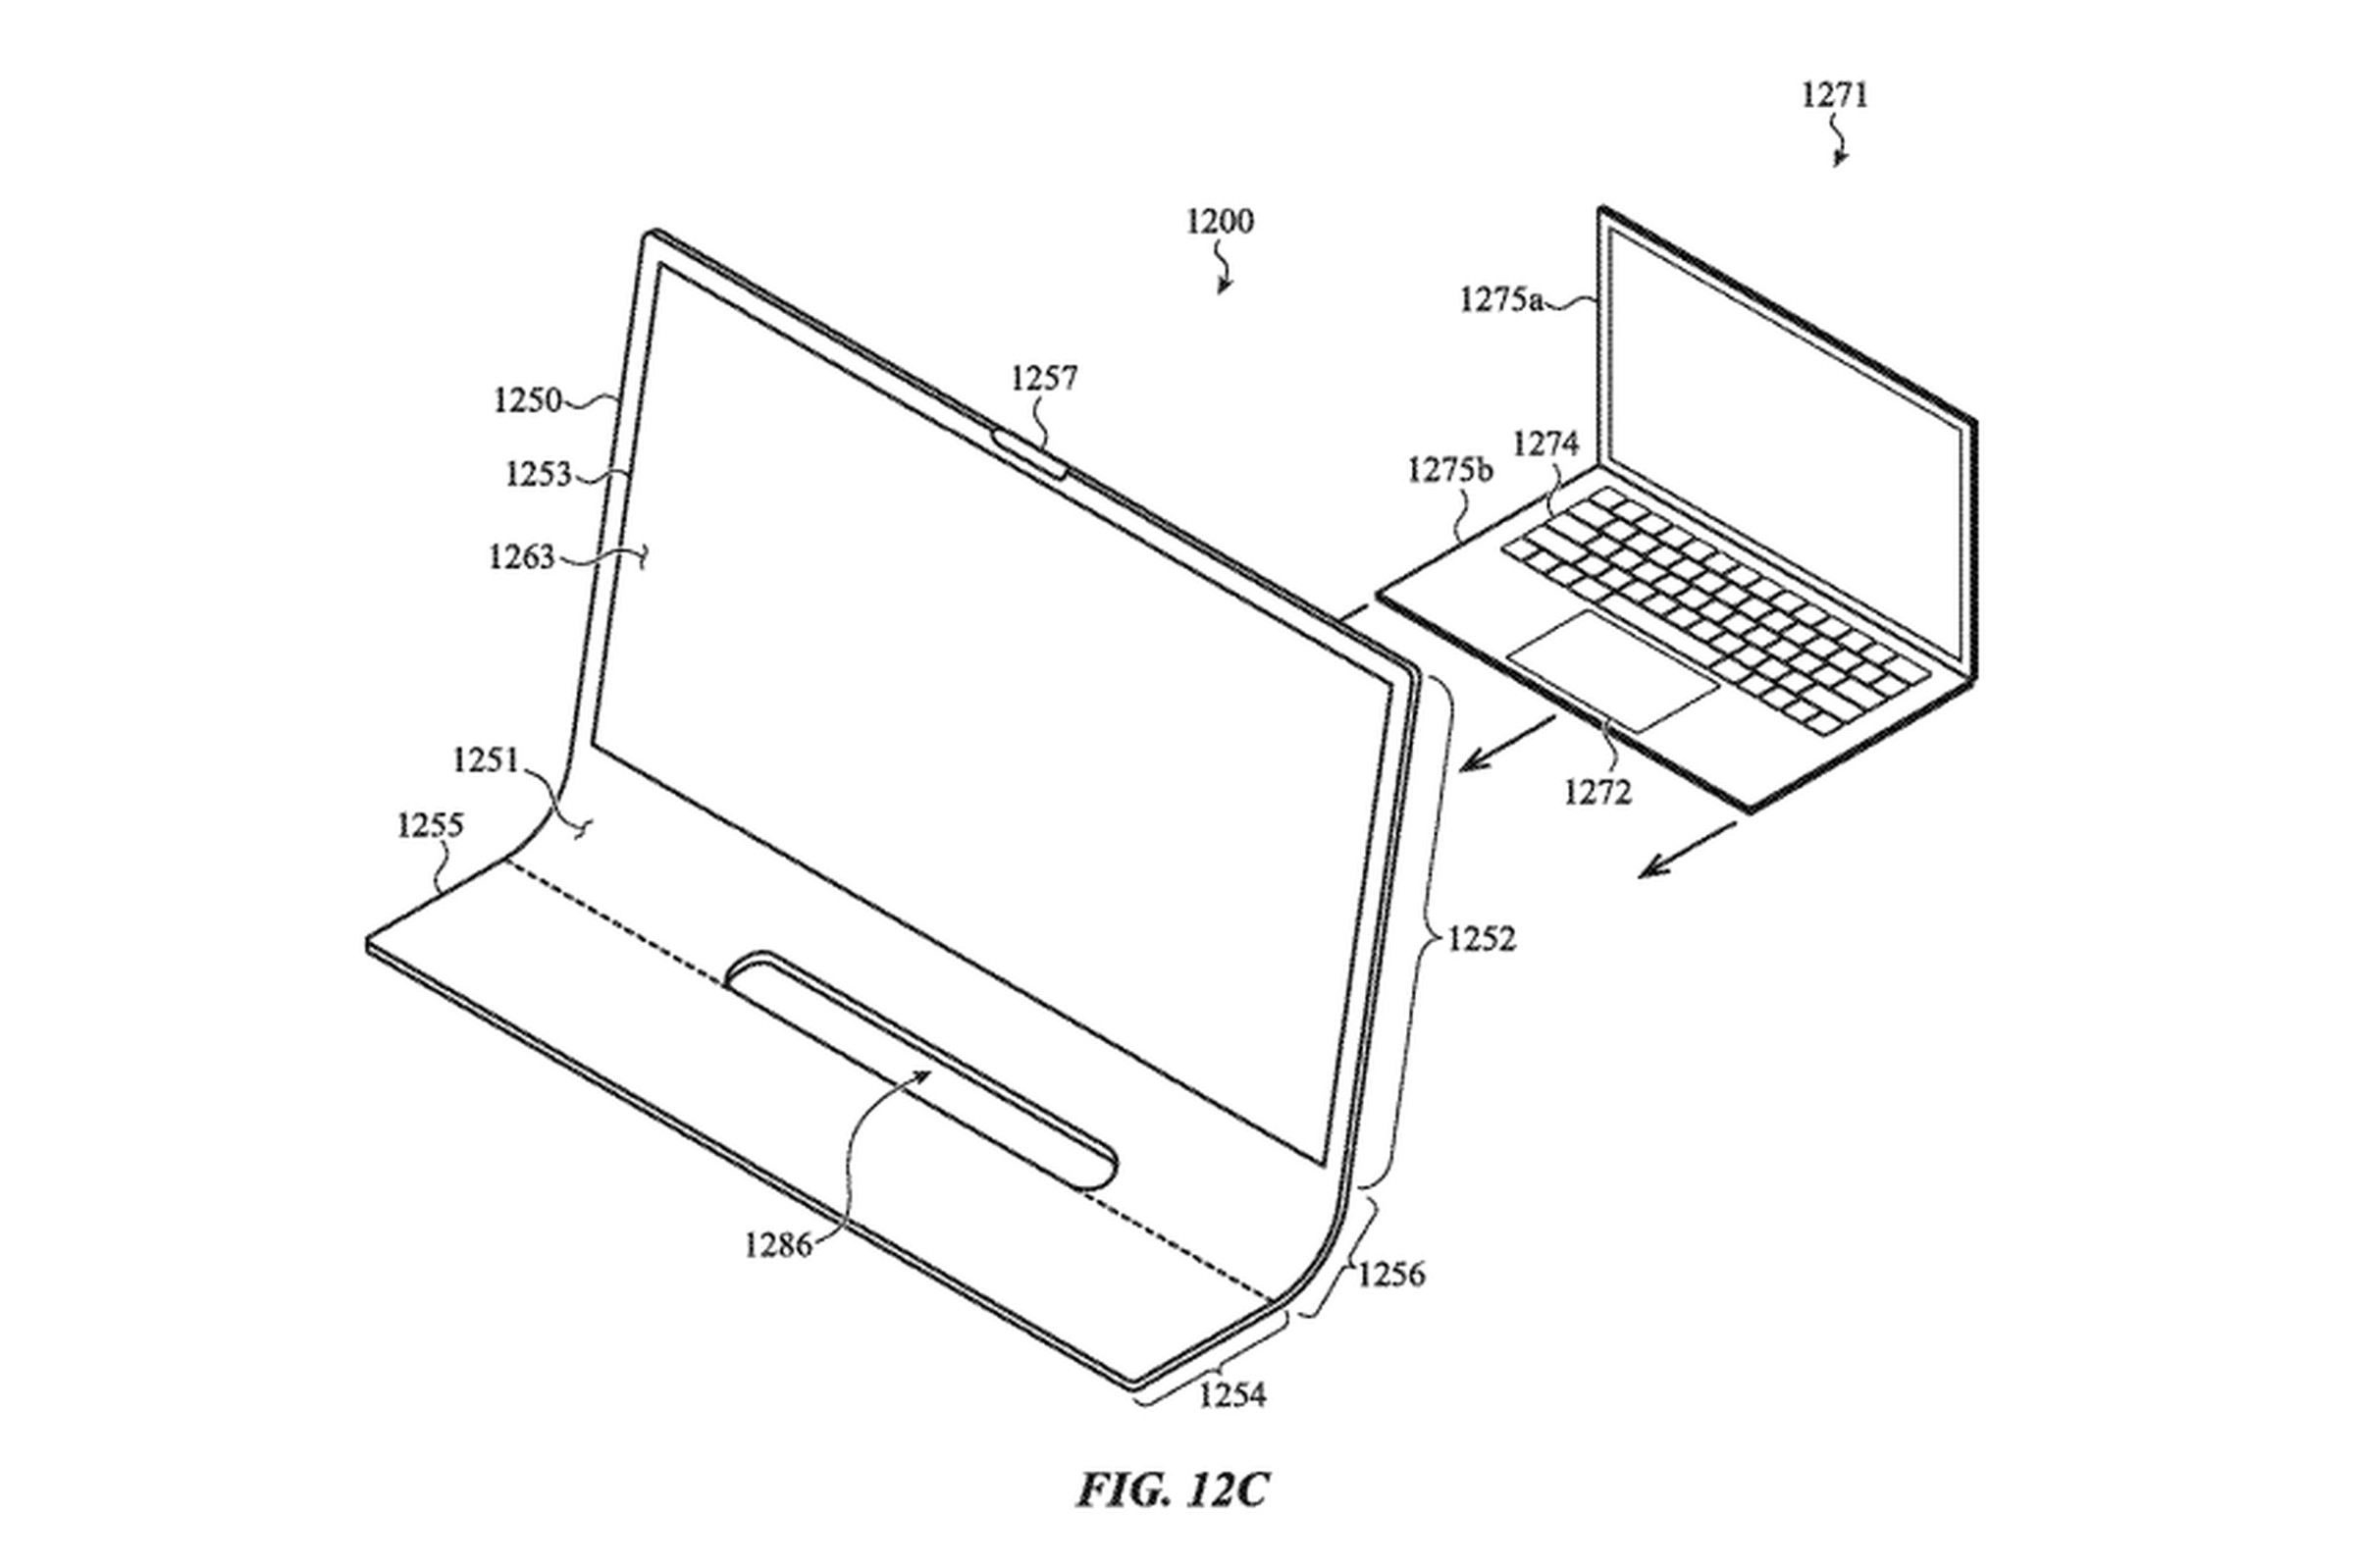 The patent application even suggests the design could allow a MacBook to be docked into the display.